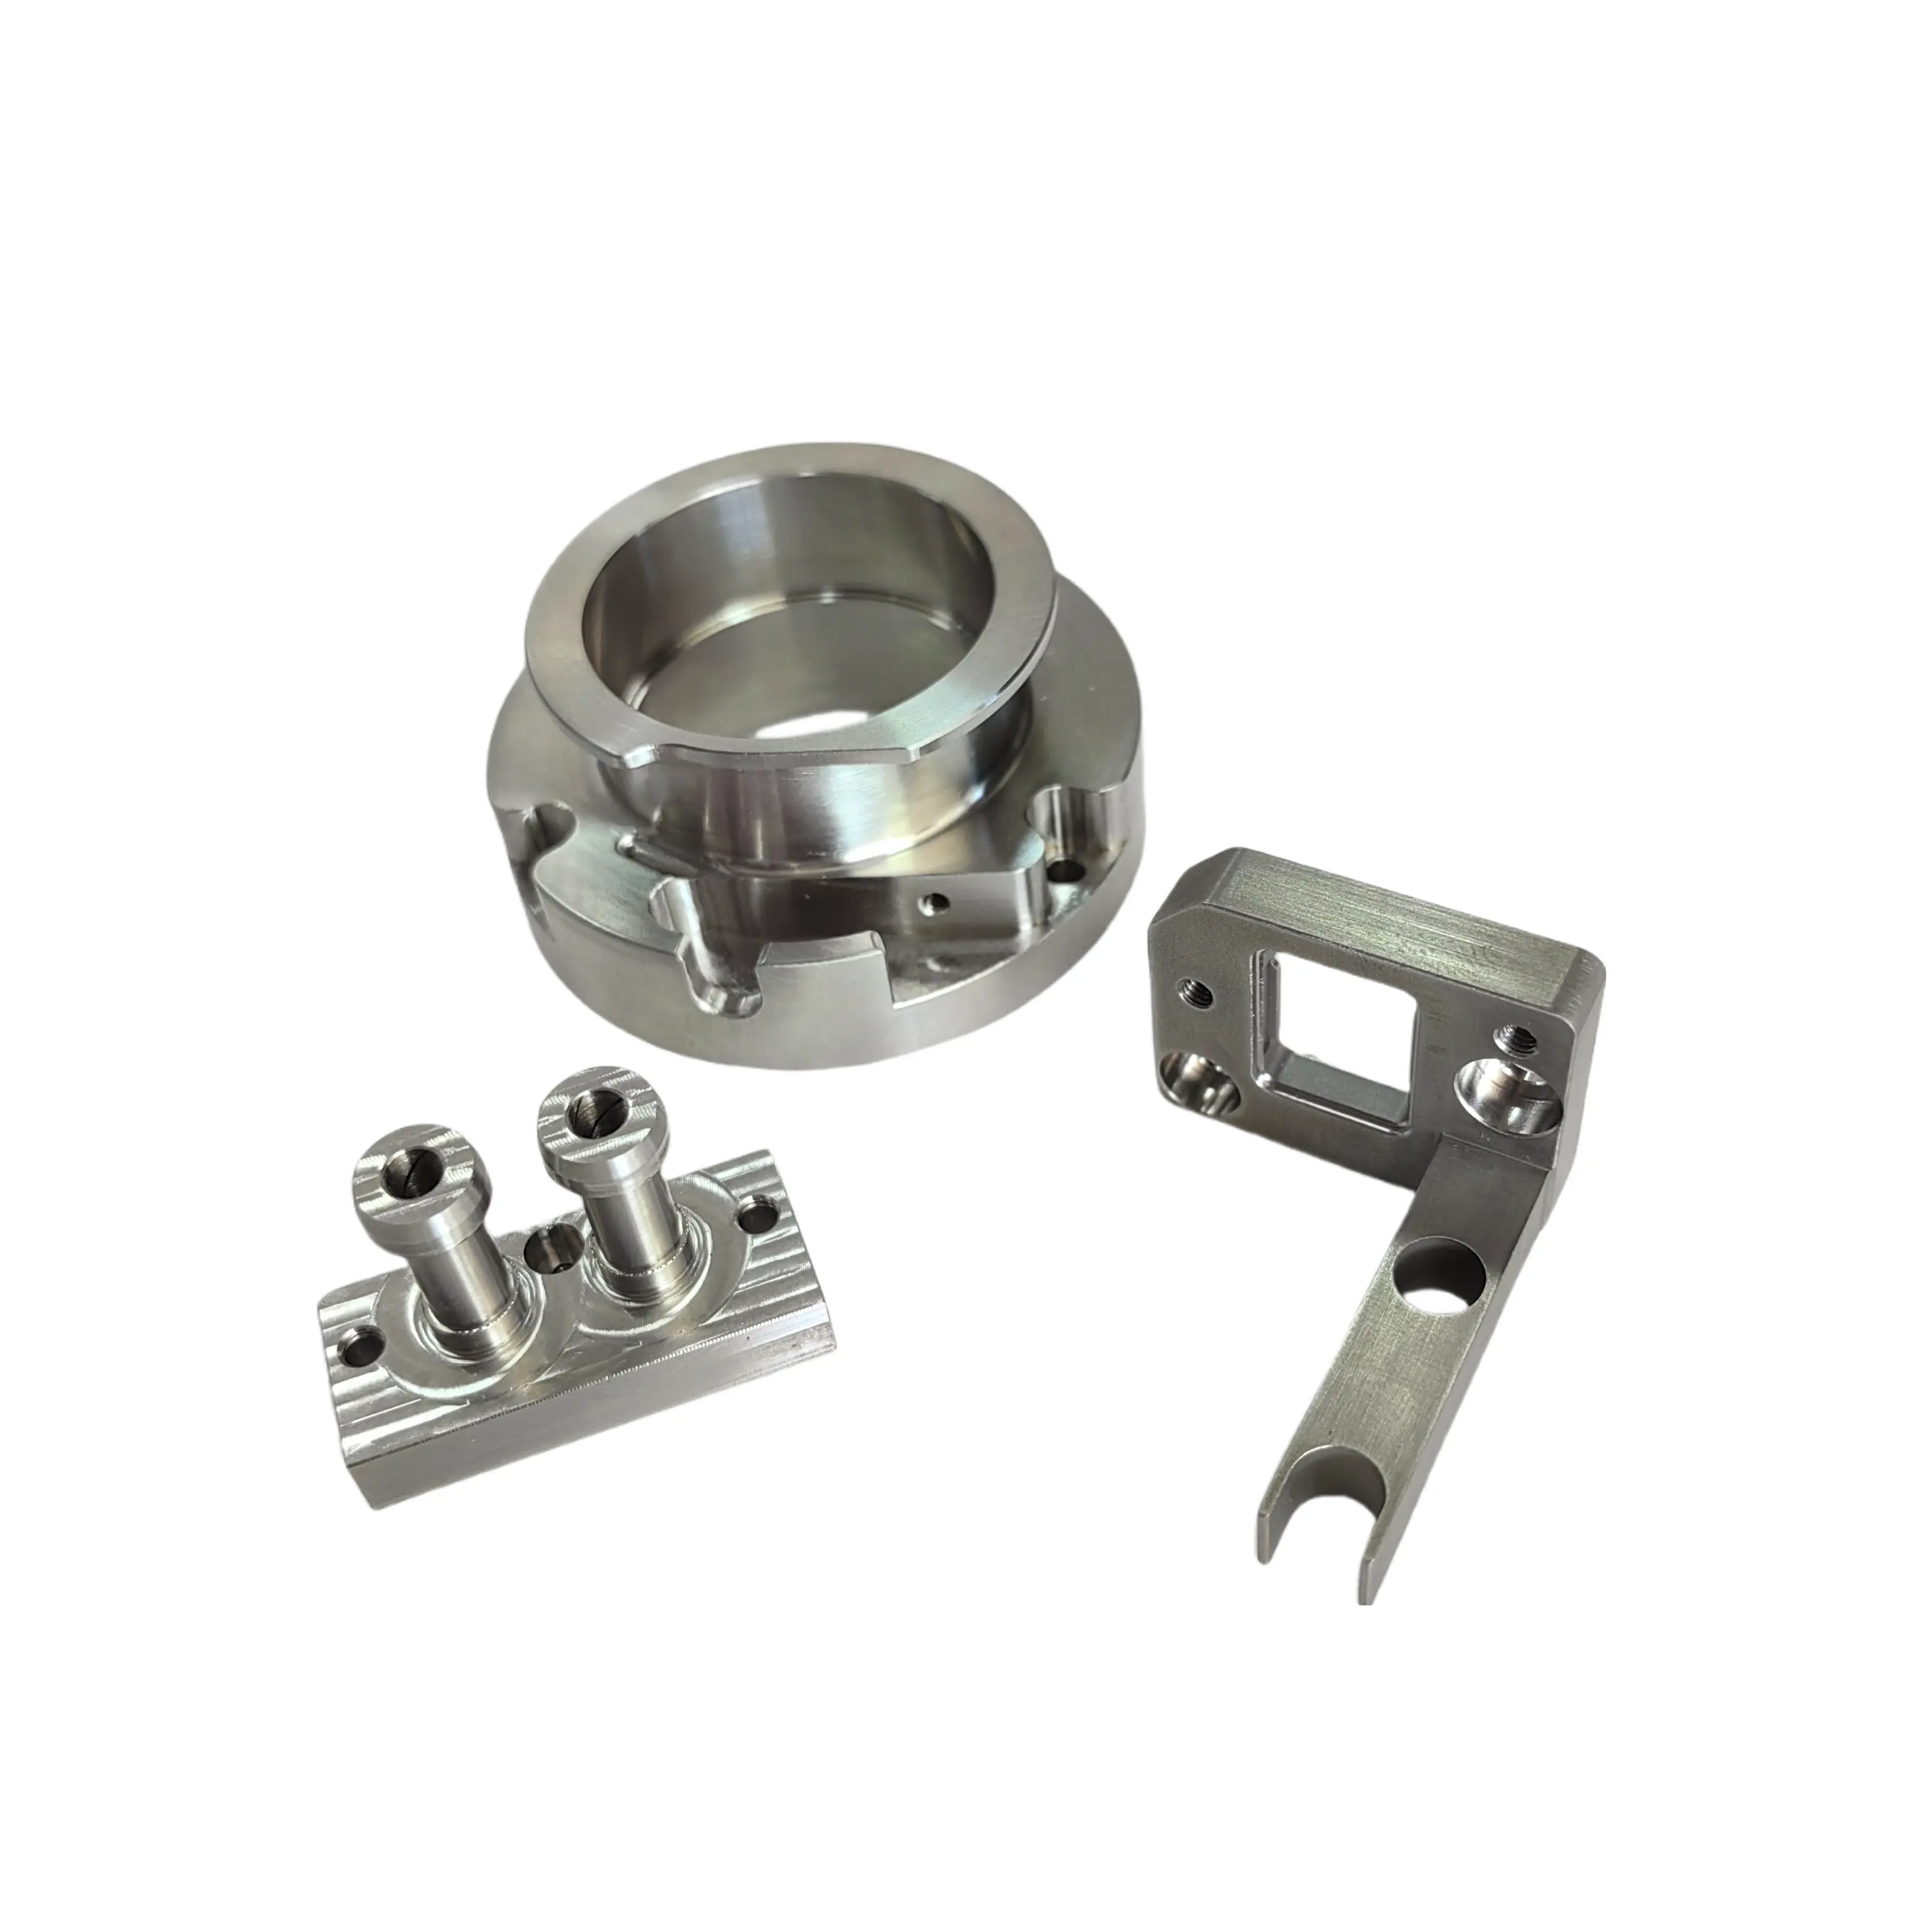 Stainless Steel Precision CNC Machined Service Hardware Precision Raw Aluminum Parts Mechanical Turning Cnc Lathe Machining